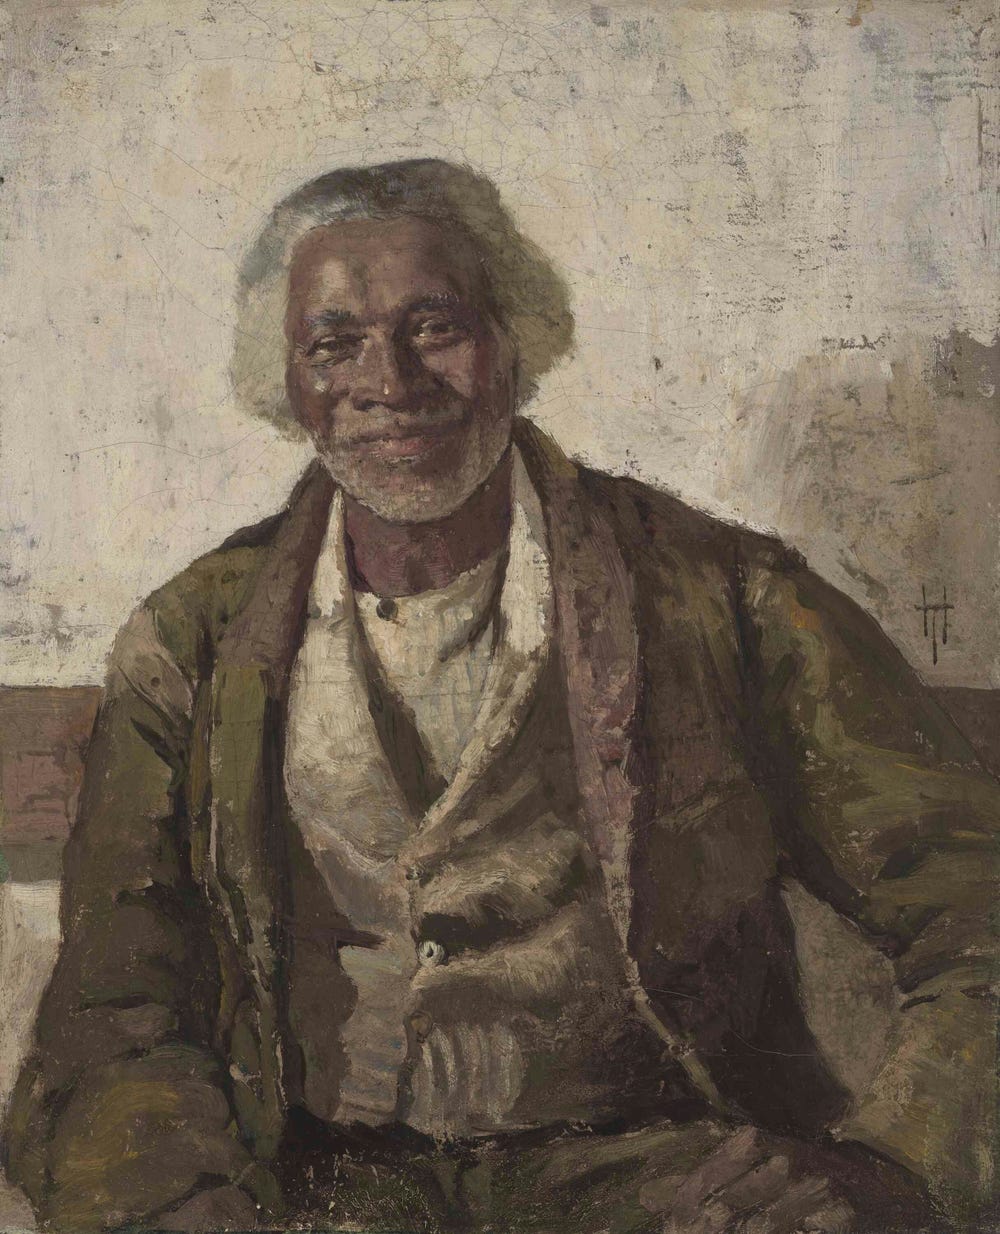 Portrait of African American friend and neighbor of the artist